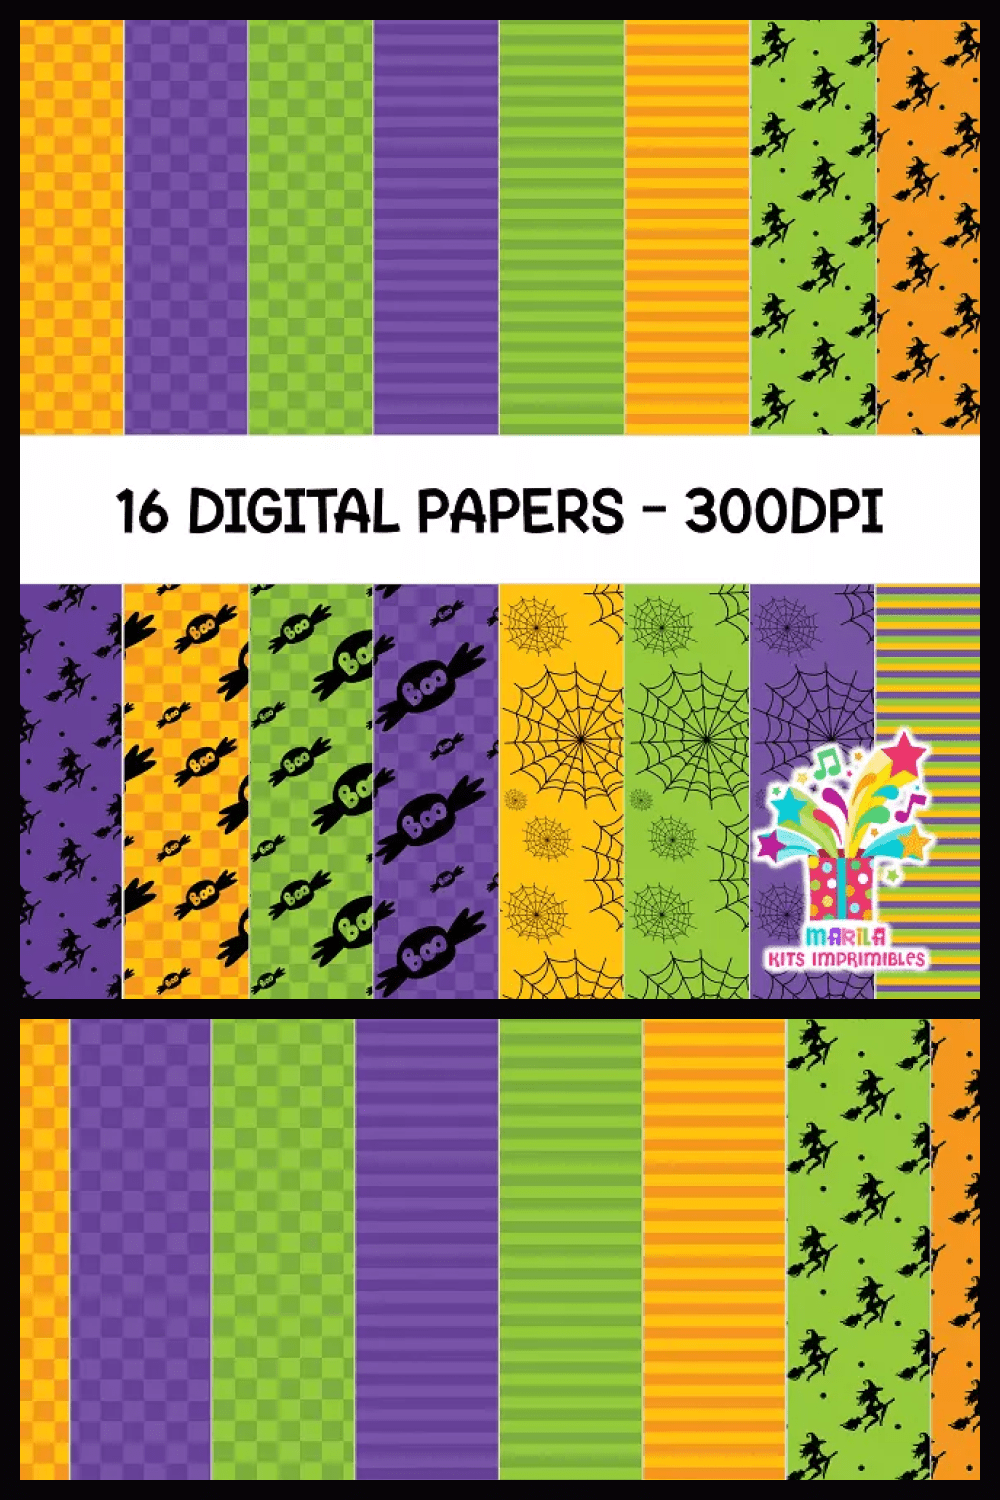 A collage of Halloween-themed wrapping paper options.